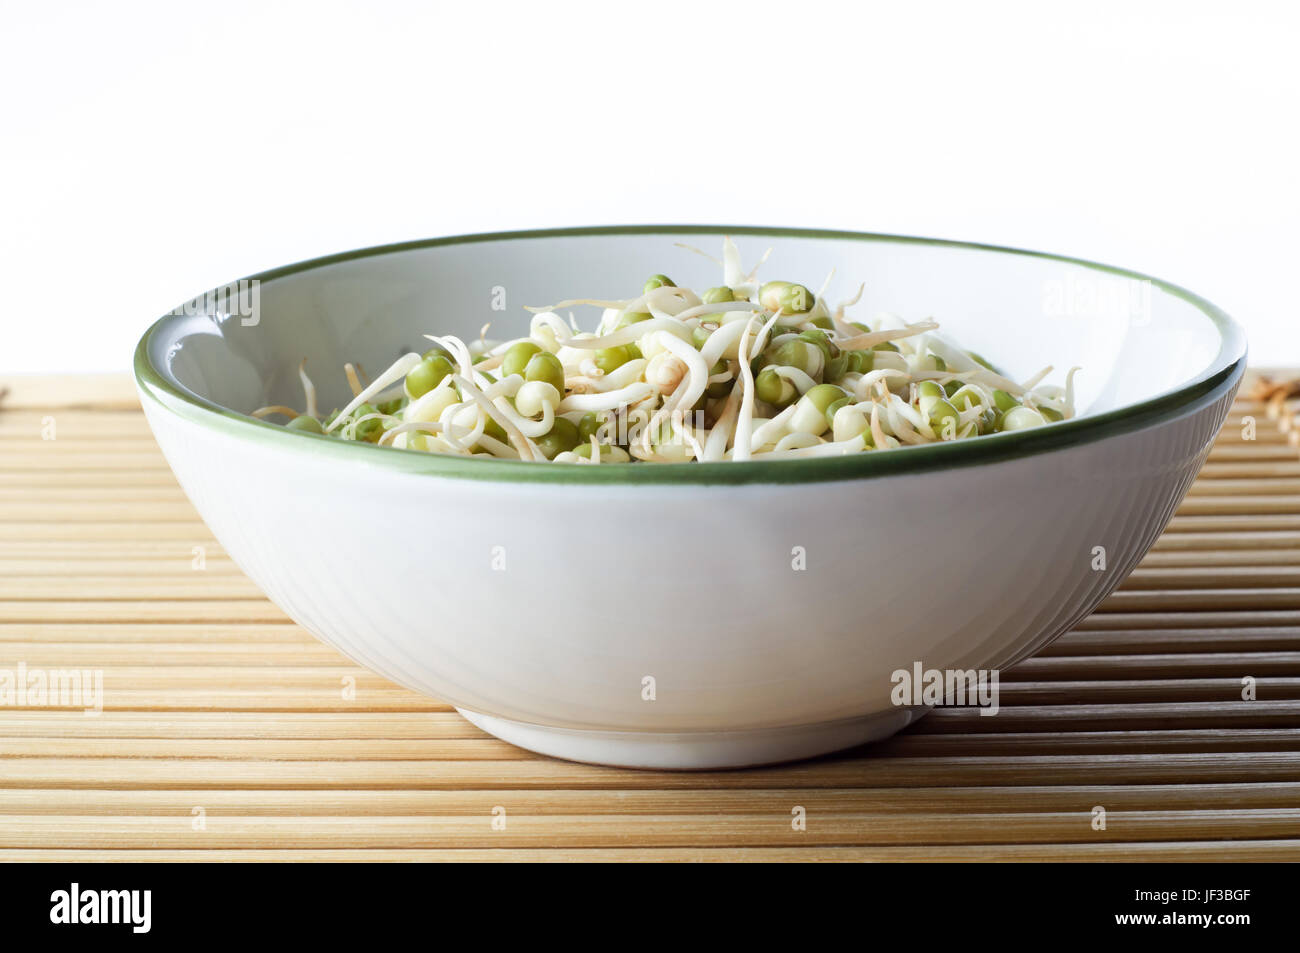 A bowl of mung beansprouts on a bamboo placemat with copy space above.  Landscape (horizontal) orientation. Stock Photo